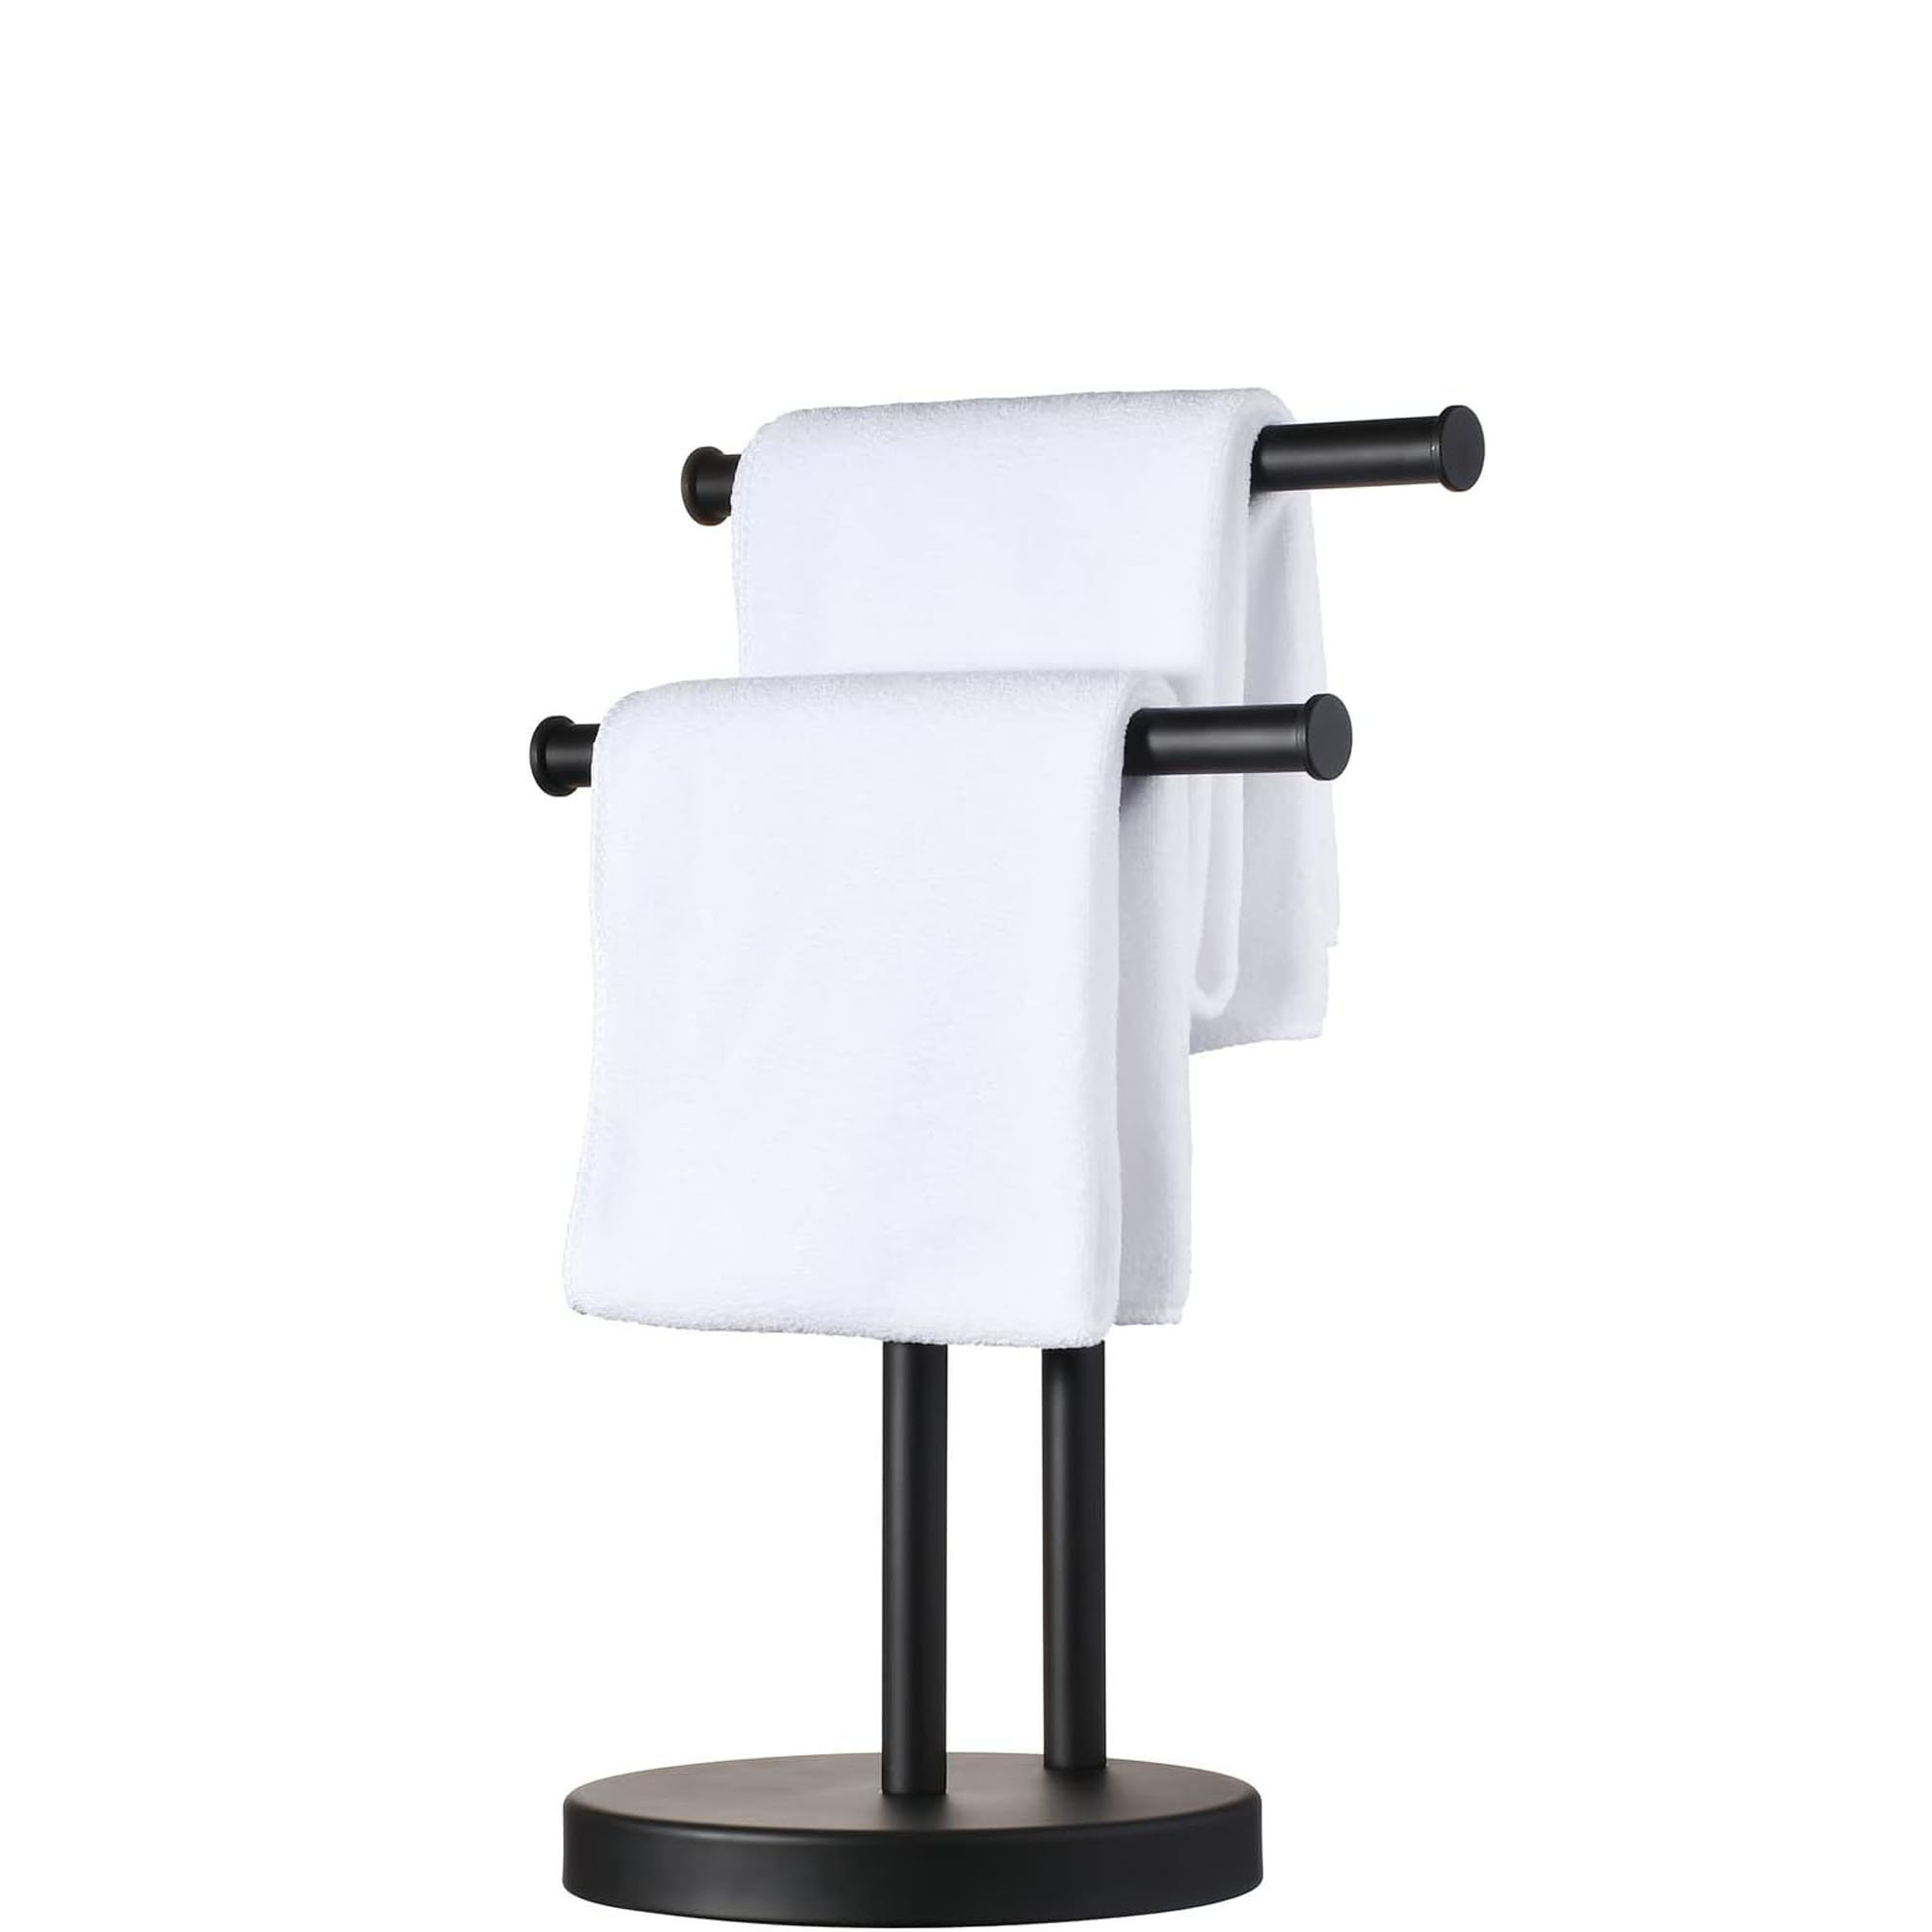 Freestanding Black Toilet Paper Holder Stand with Wood Base and Shelf